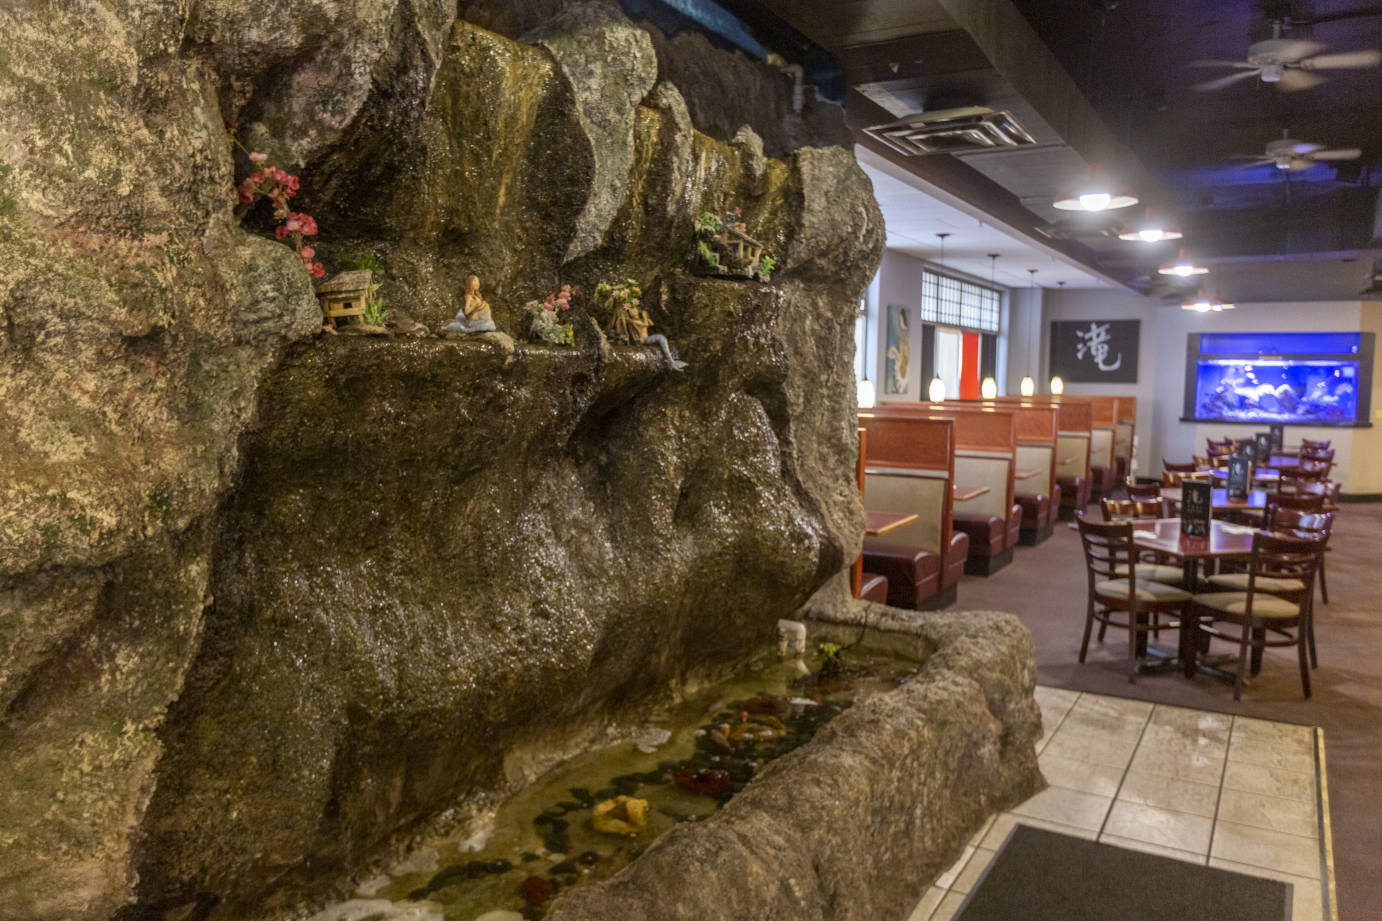 Interior, a large decorative rock fountain at the dining area